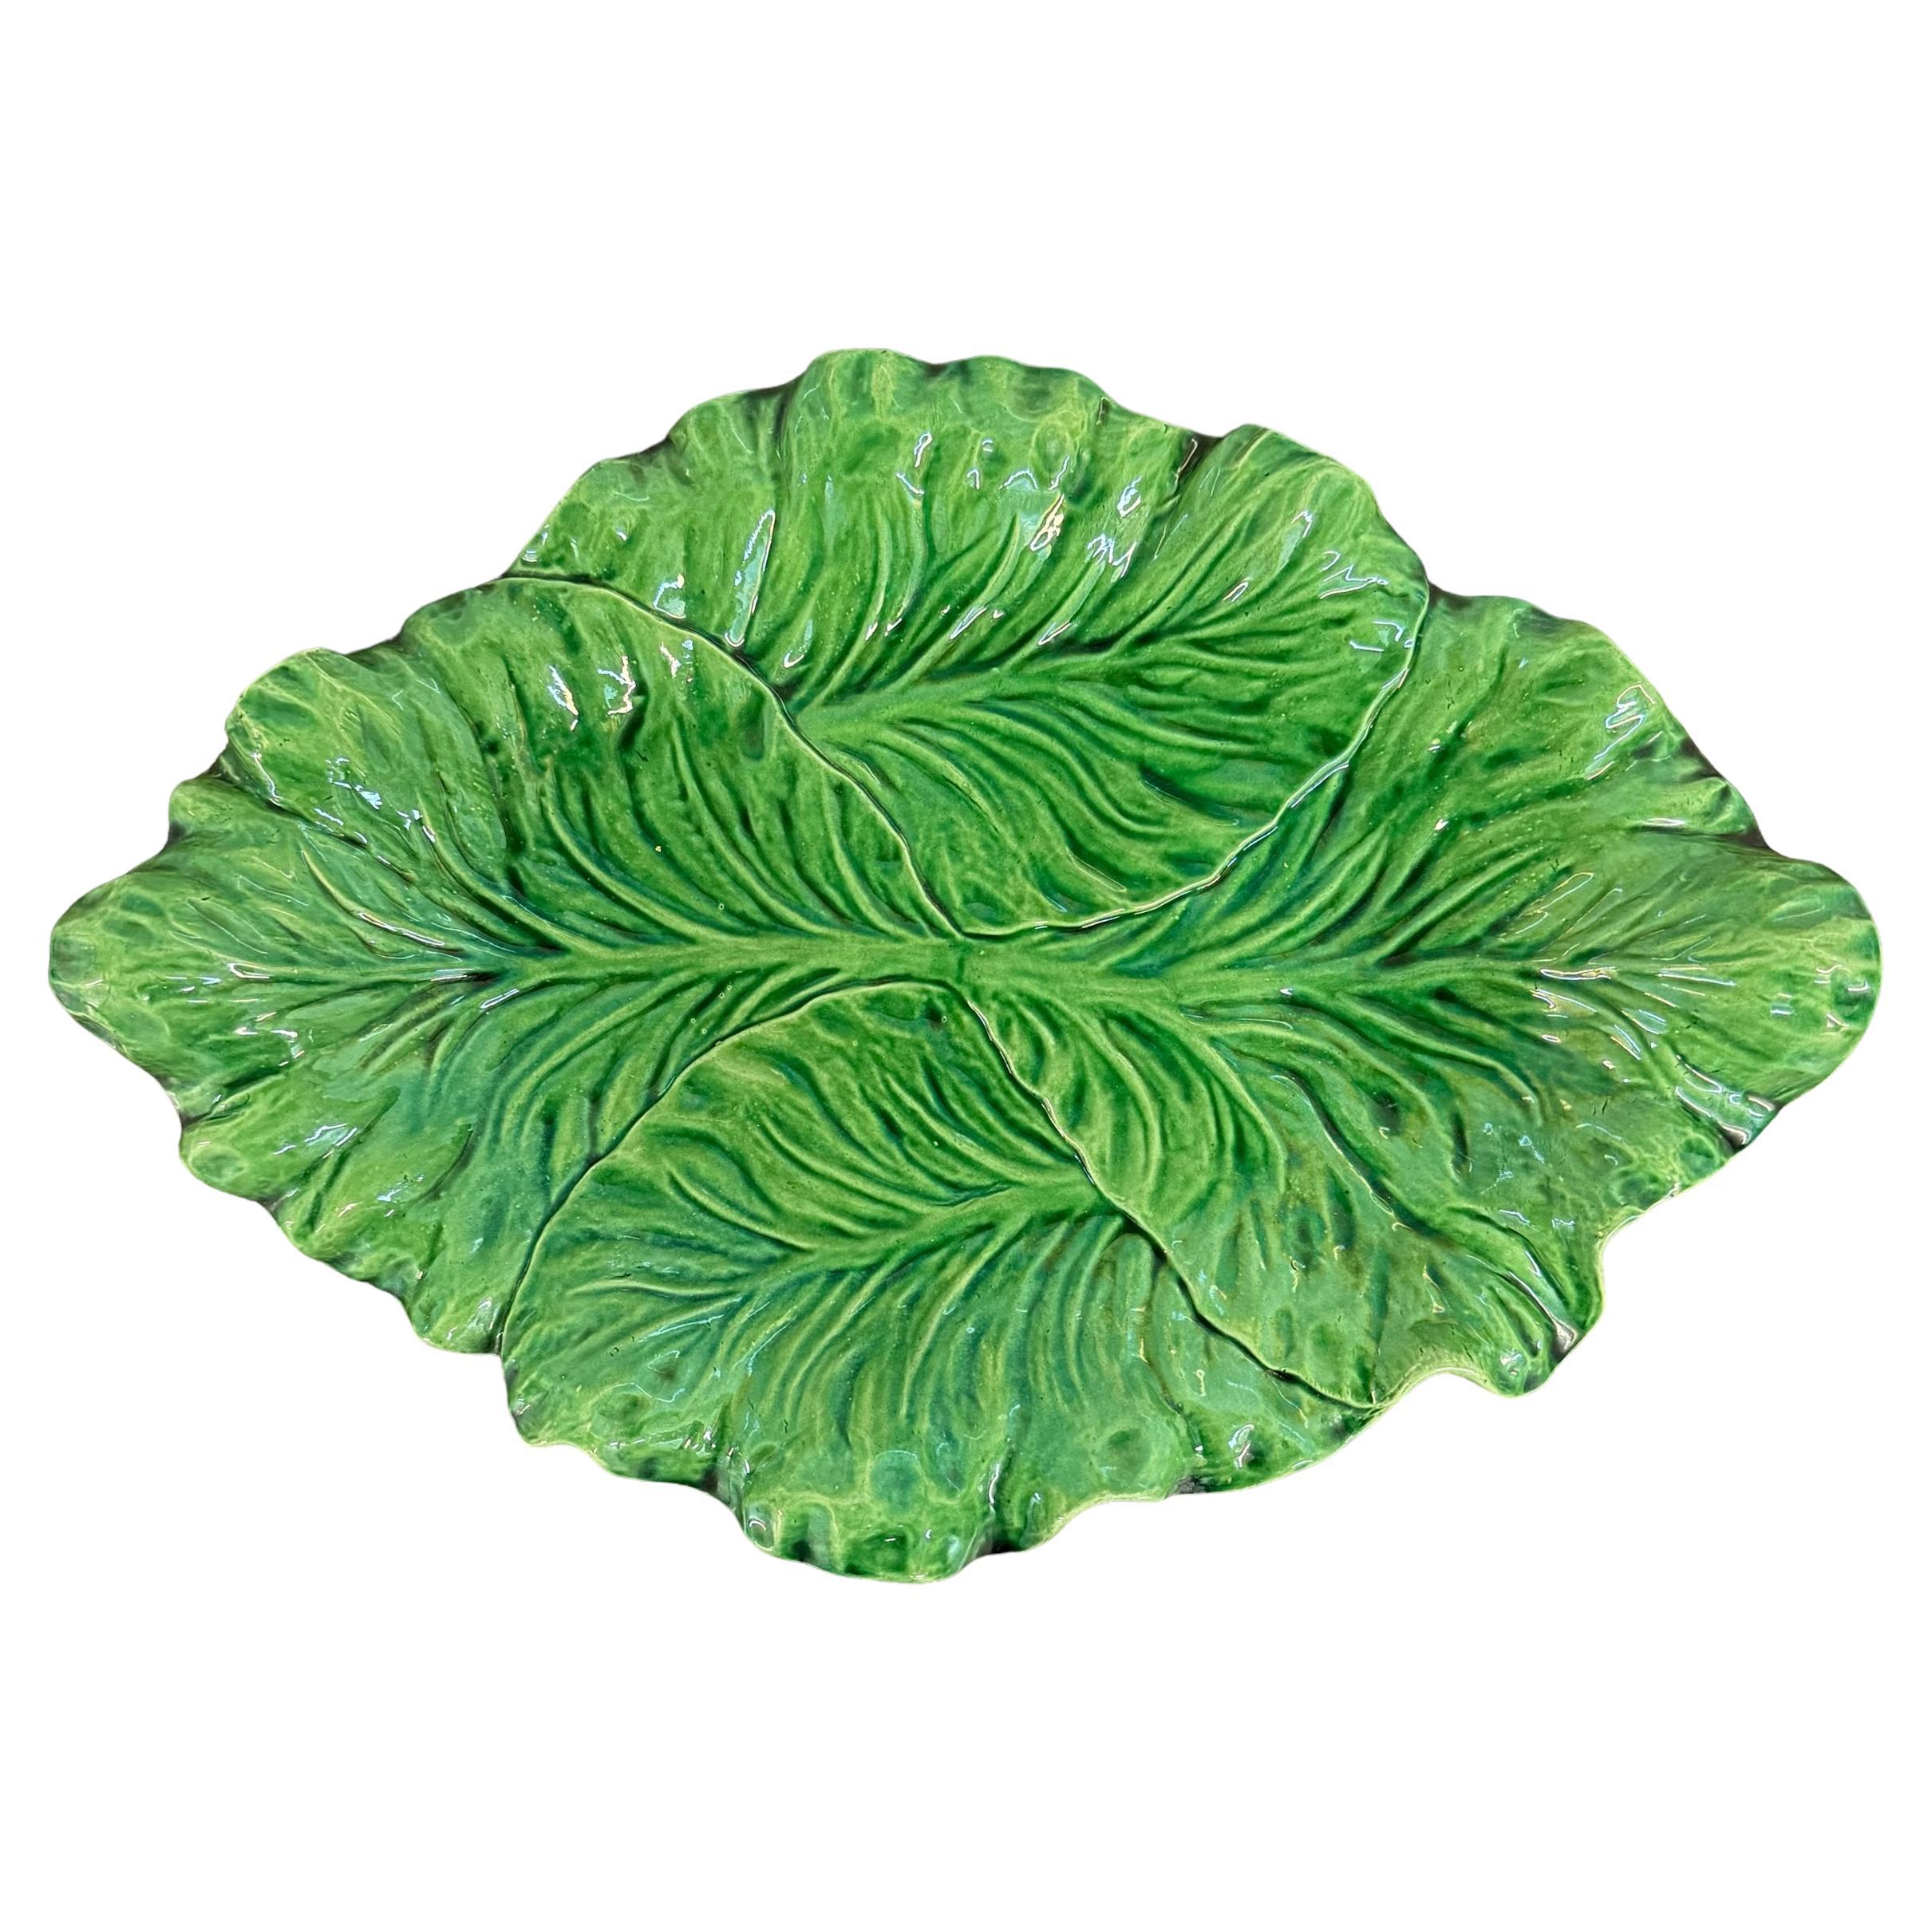 Late 20th Century Portuguese Cabbage Platter from Bonwit Teller